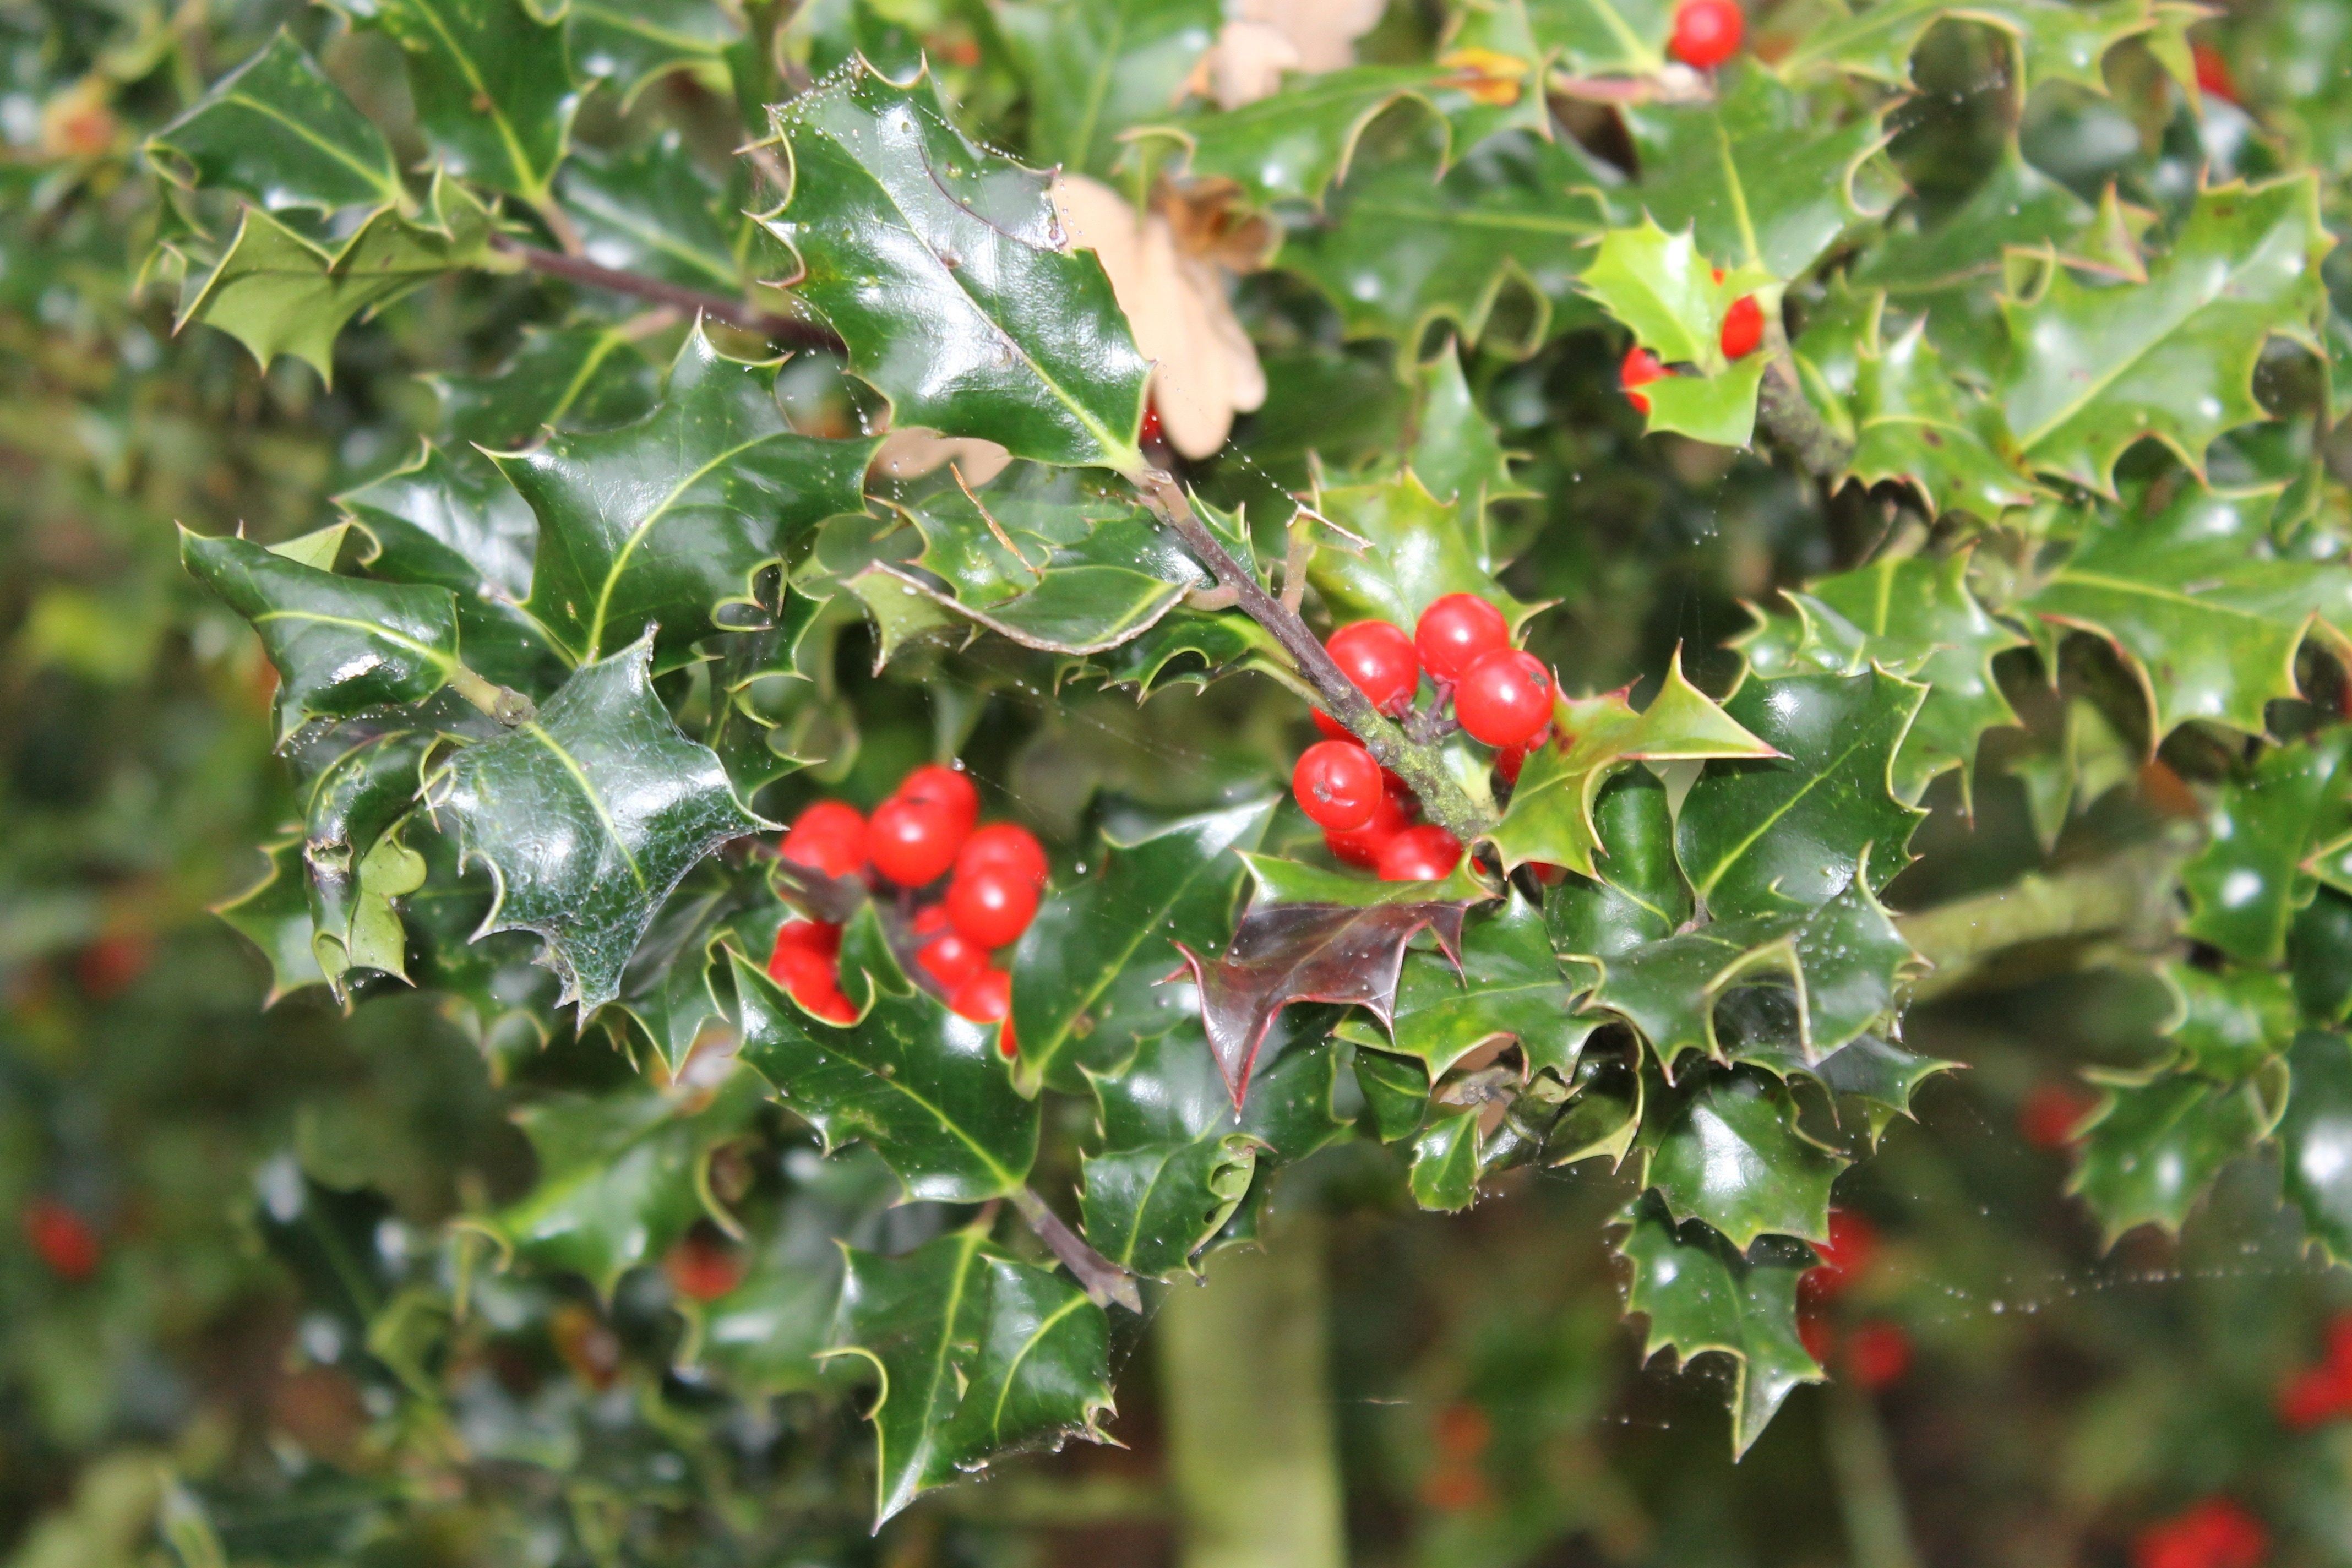 red holly berries